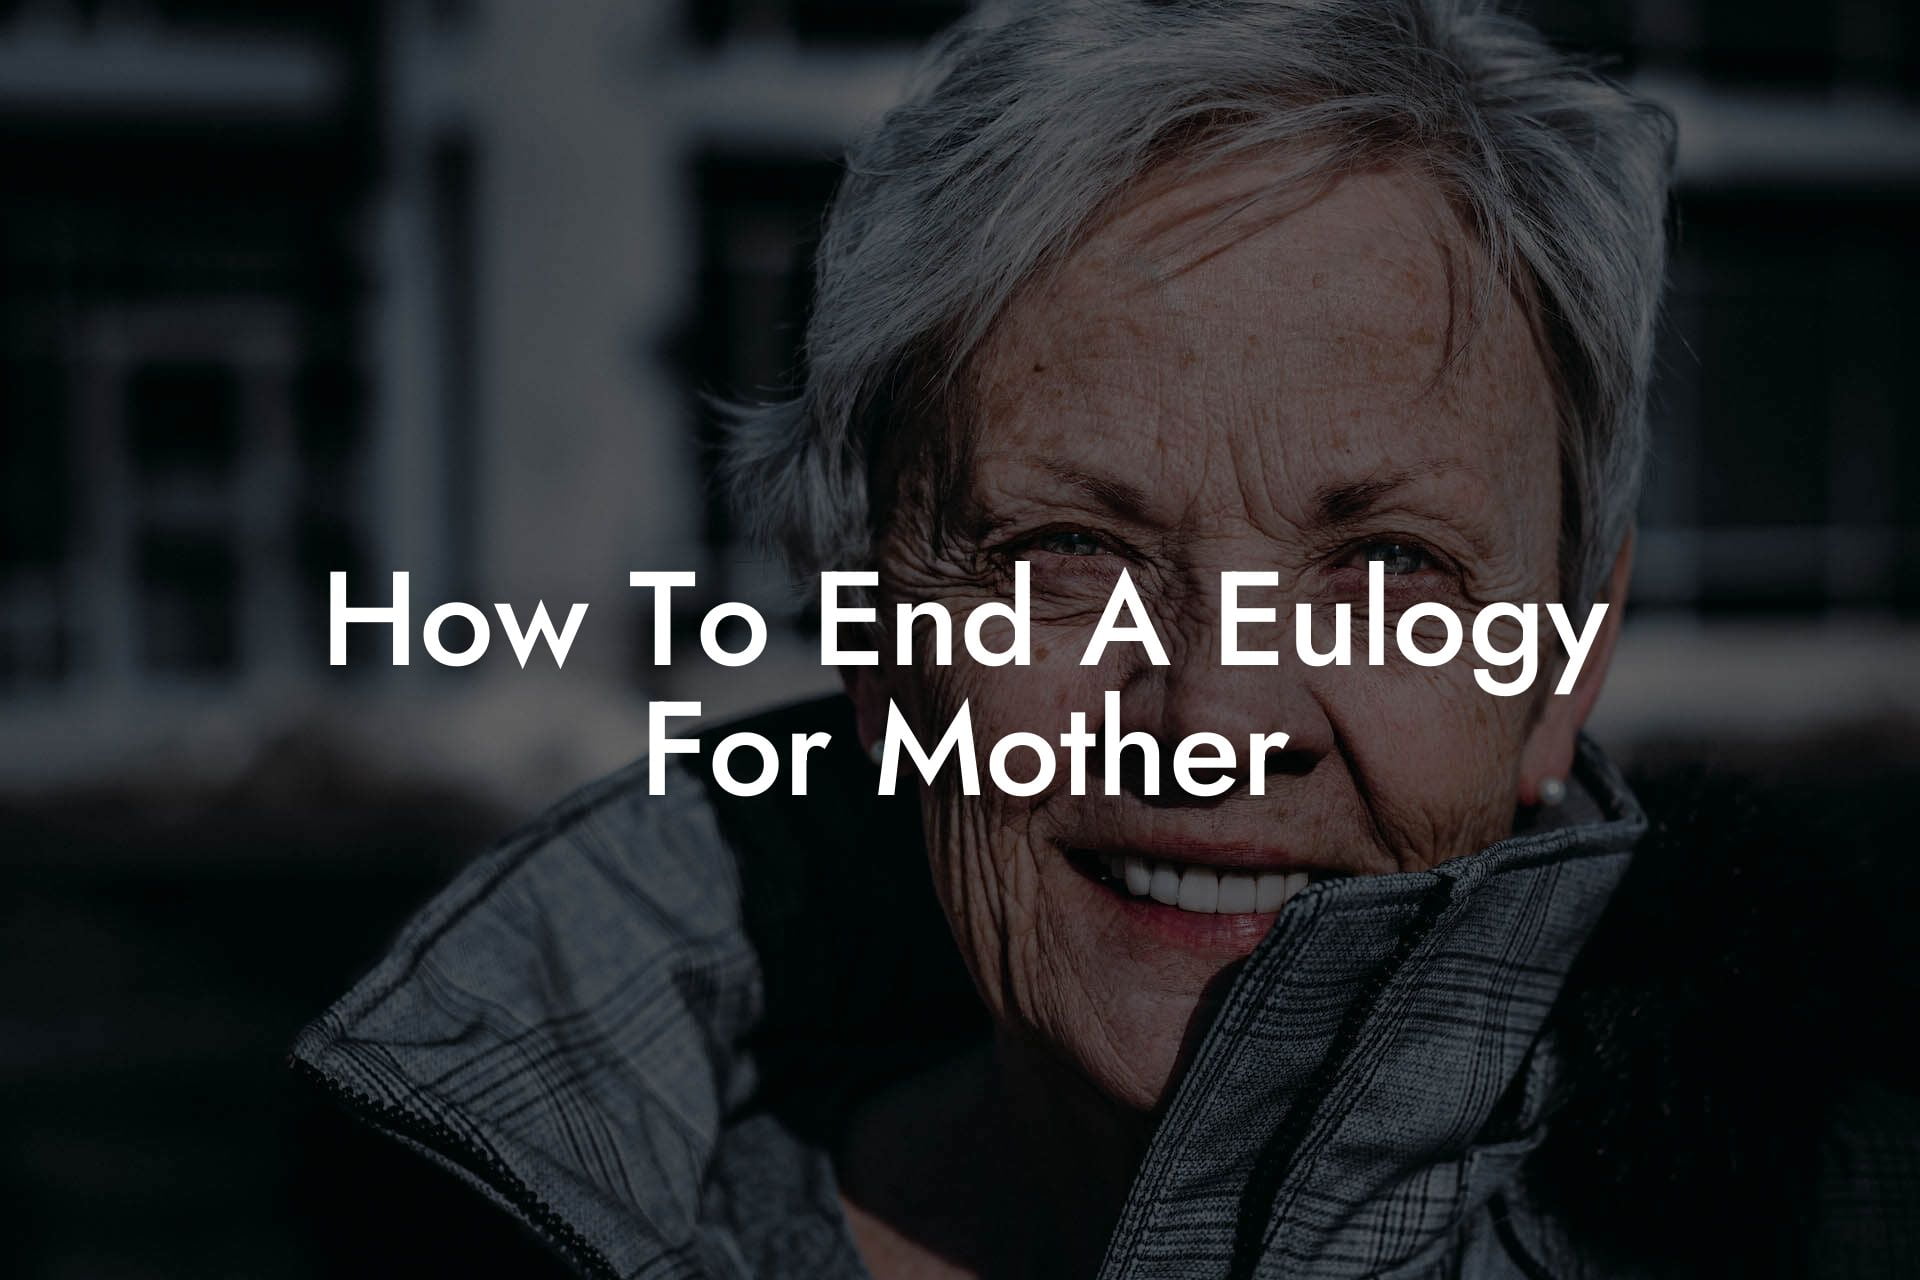 How To End A Eulogy For Mother